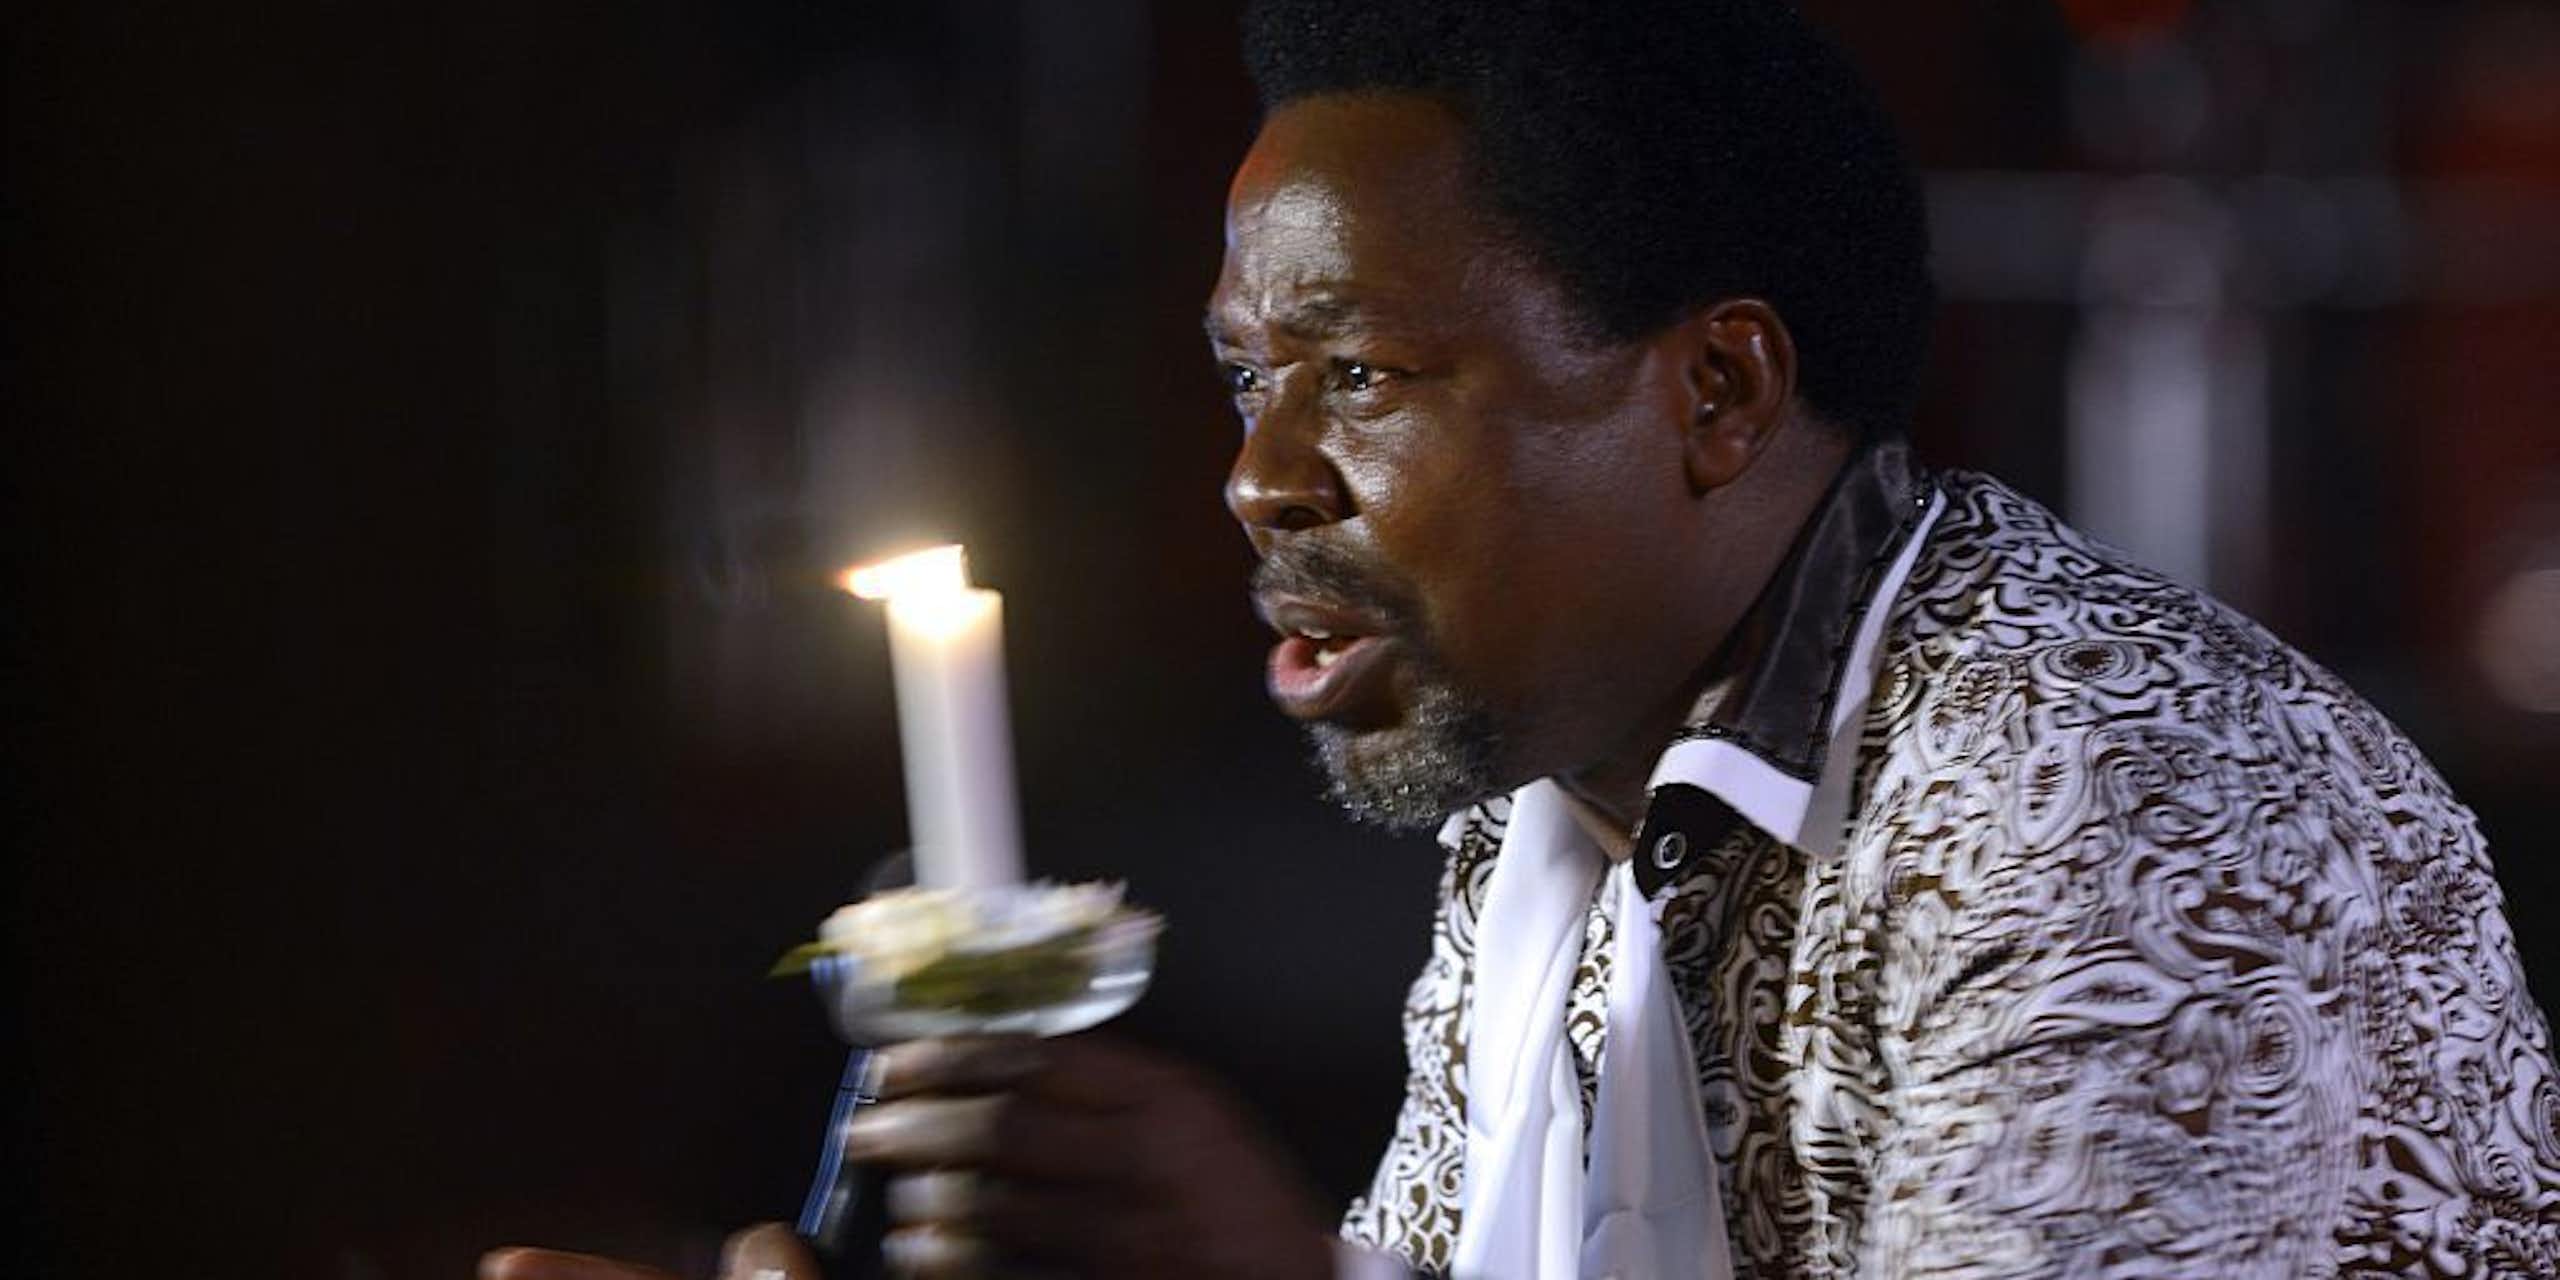 A man holds a candle as he talks, his face earnest. He has a beard and wears an elaborate black and white jacket.